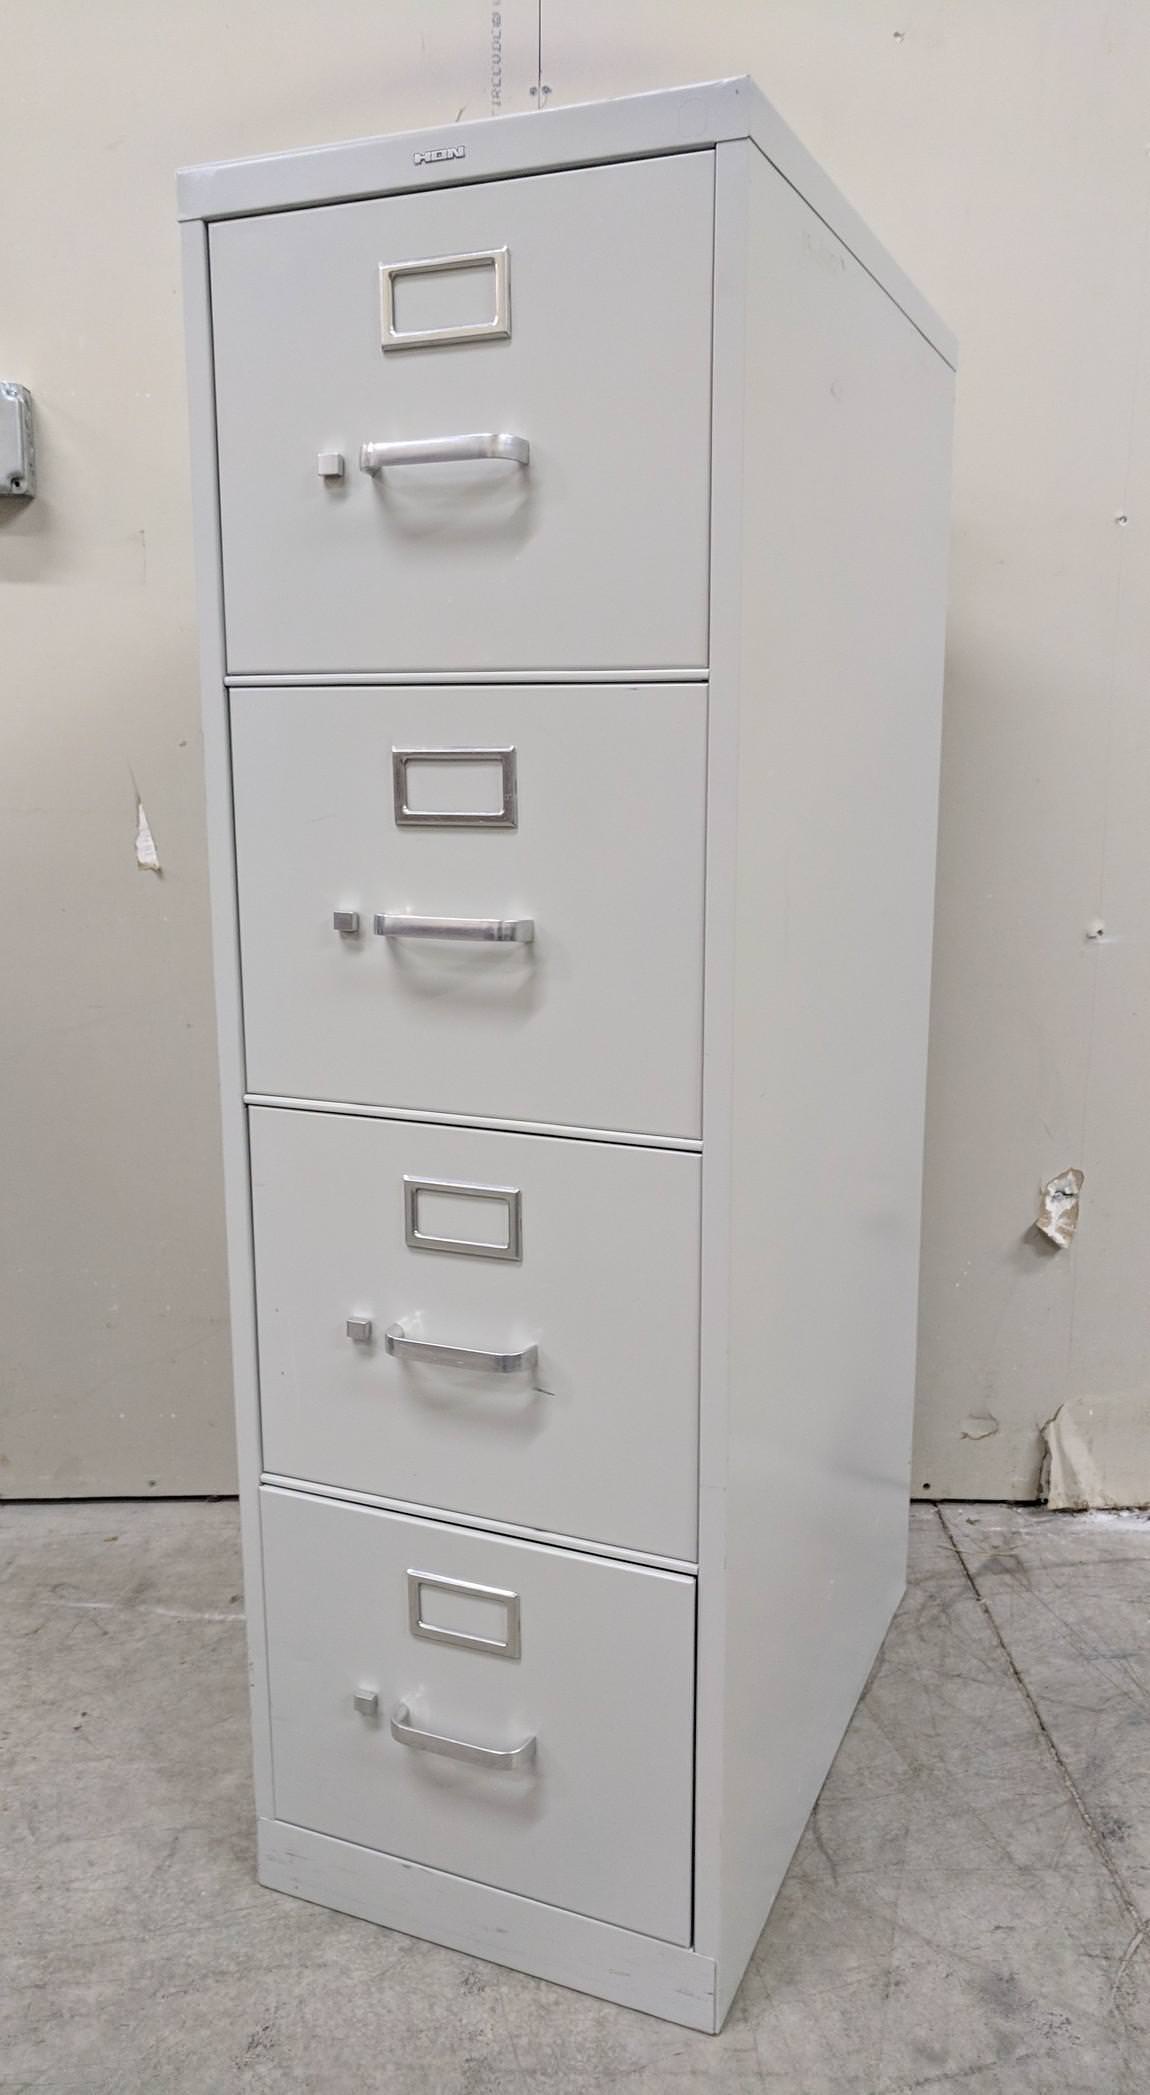 Putty Hon 4 Drawer Vertical file Cabinet - 48.75 Tall